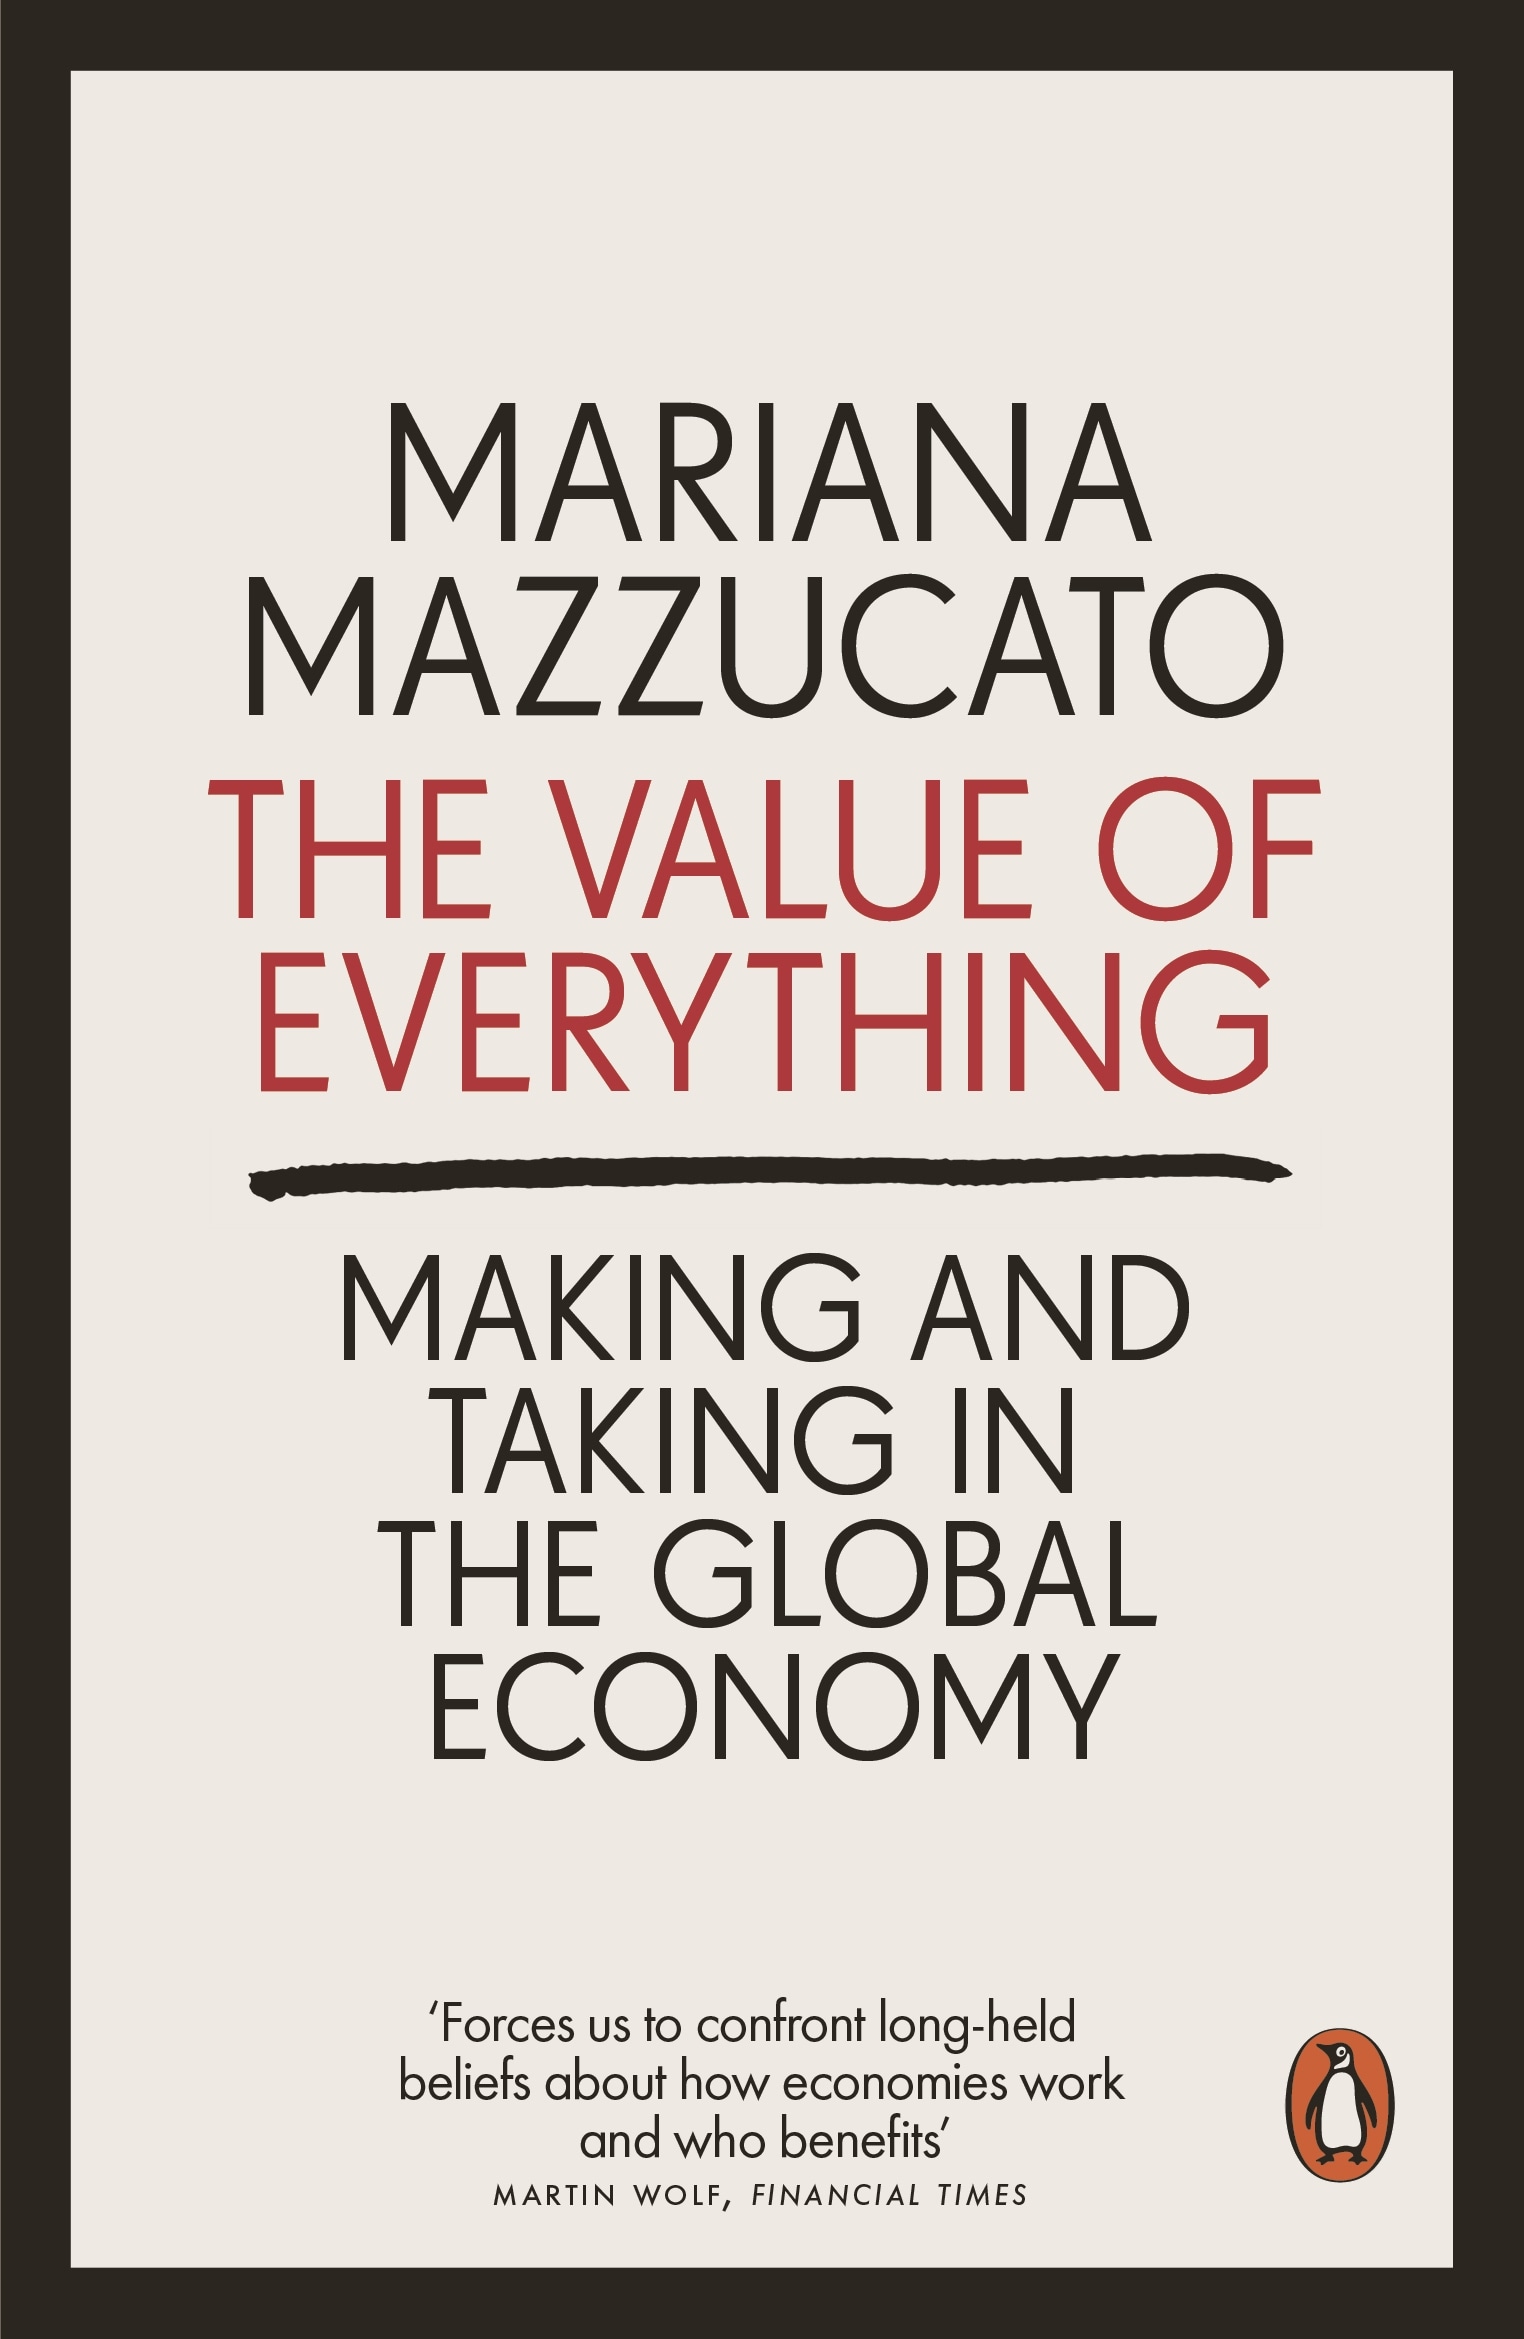 Book “The Value of Everything” by Mariana Mazzucato — April 4, 2019